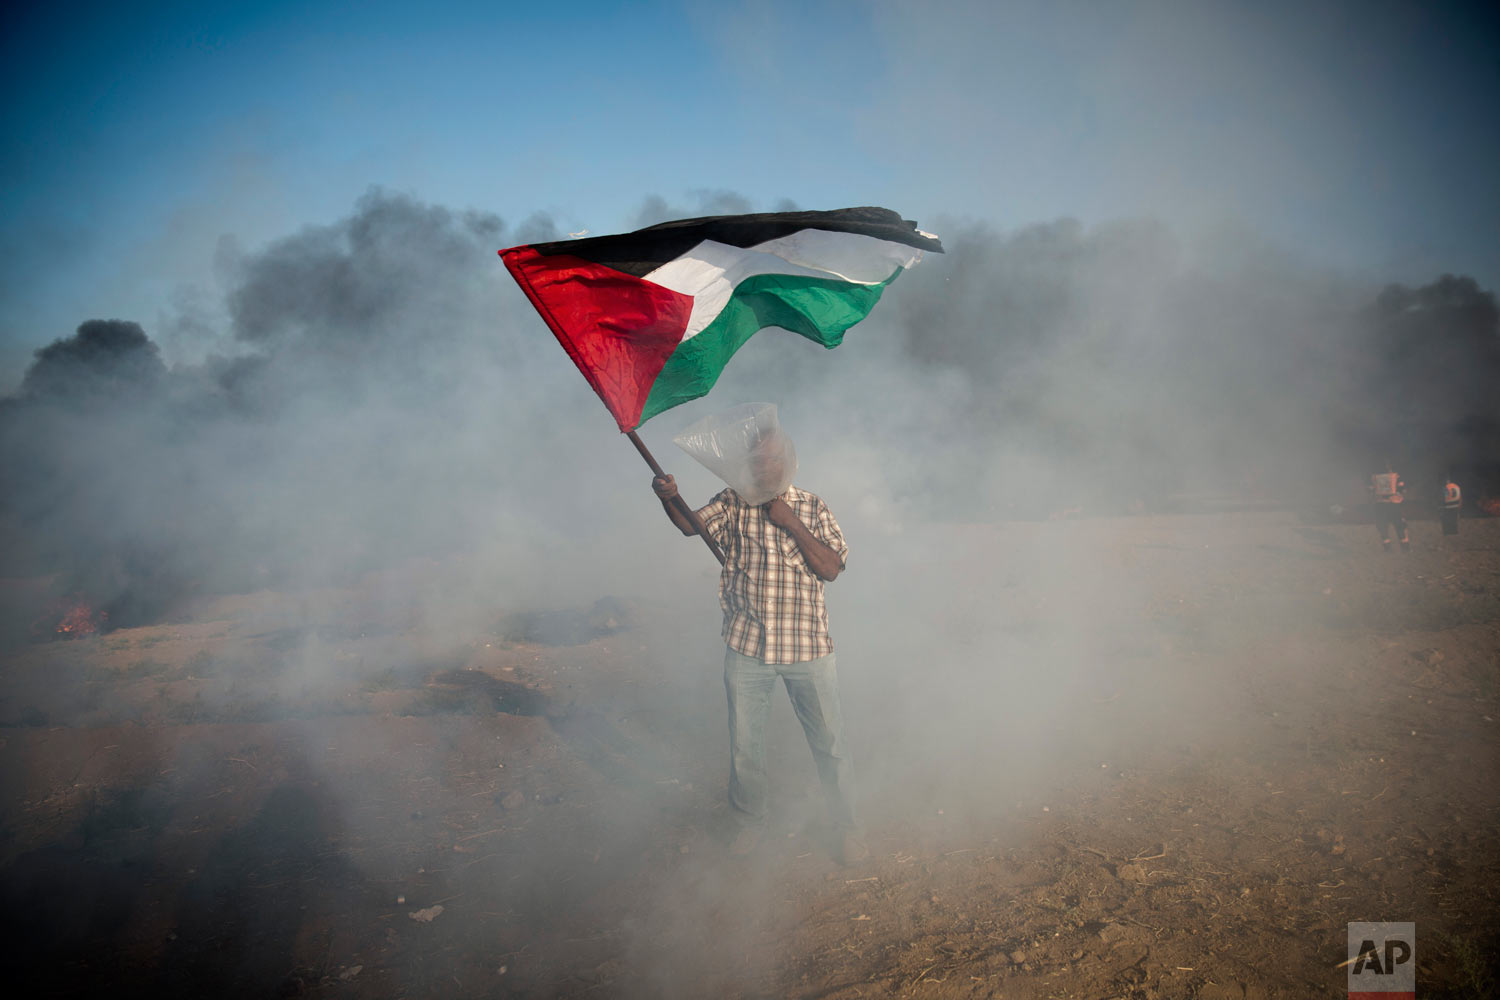  A Palestinian protester wears a plastic bag on his head as a protection from teargas as he waves a national flag during a protest at the Gaza Strip's border with Israel, Friday, Aug.10, 2018. Violence erupted at the Gaza border Friday after the territory's militant Islamic Hamas rulers and Israel appeared to be honoring a cease-fire that ended two days of intense violence amid efforts by neighboring Egypt to negotiate between the two sides. (AP Photo/Khalil Hamra) 